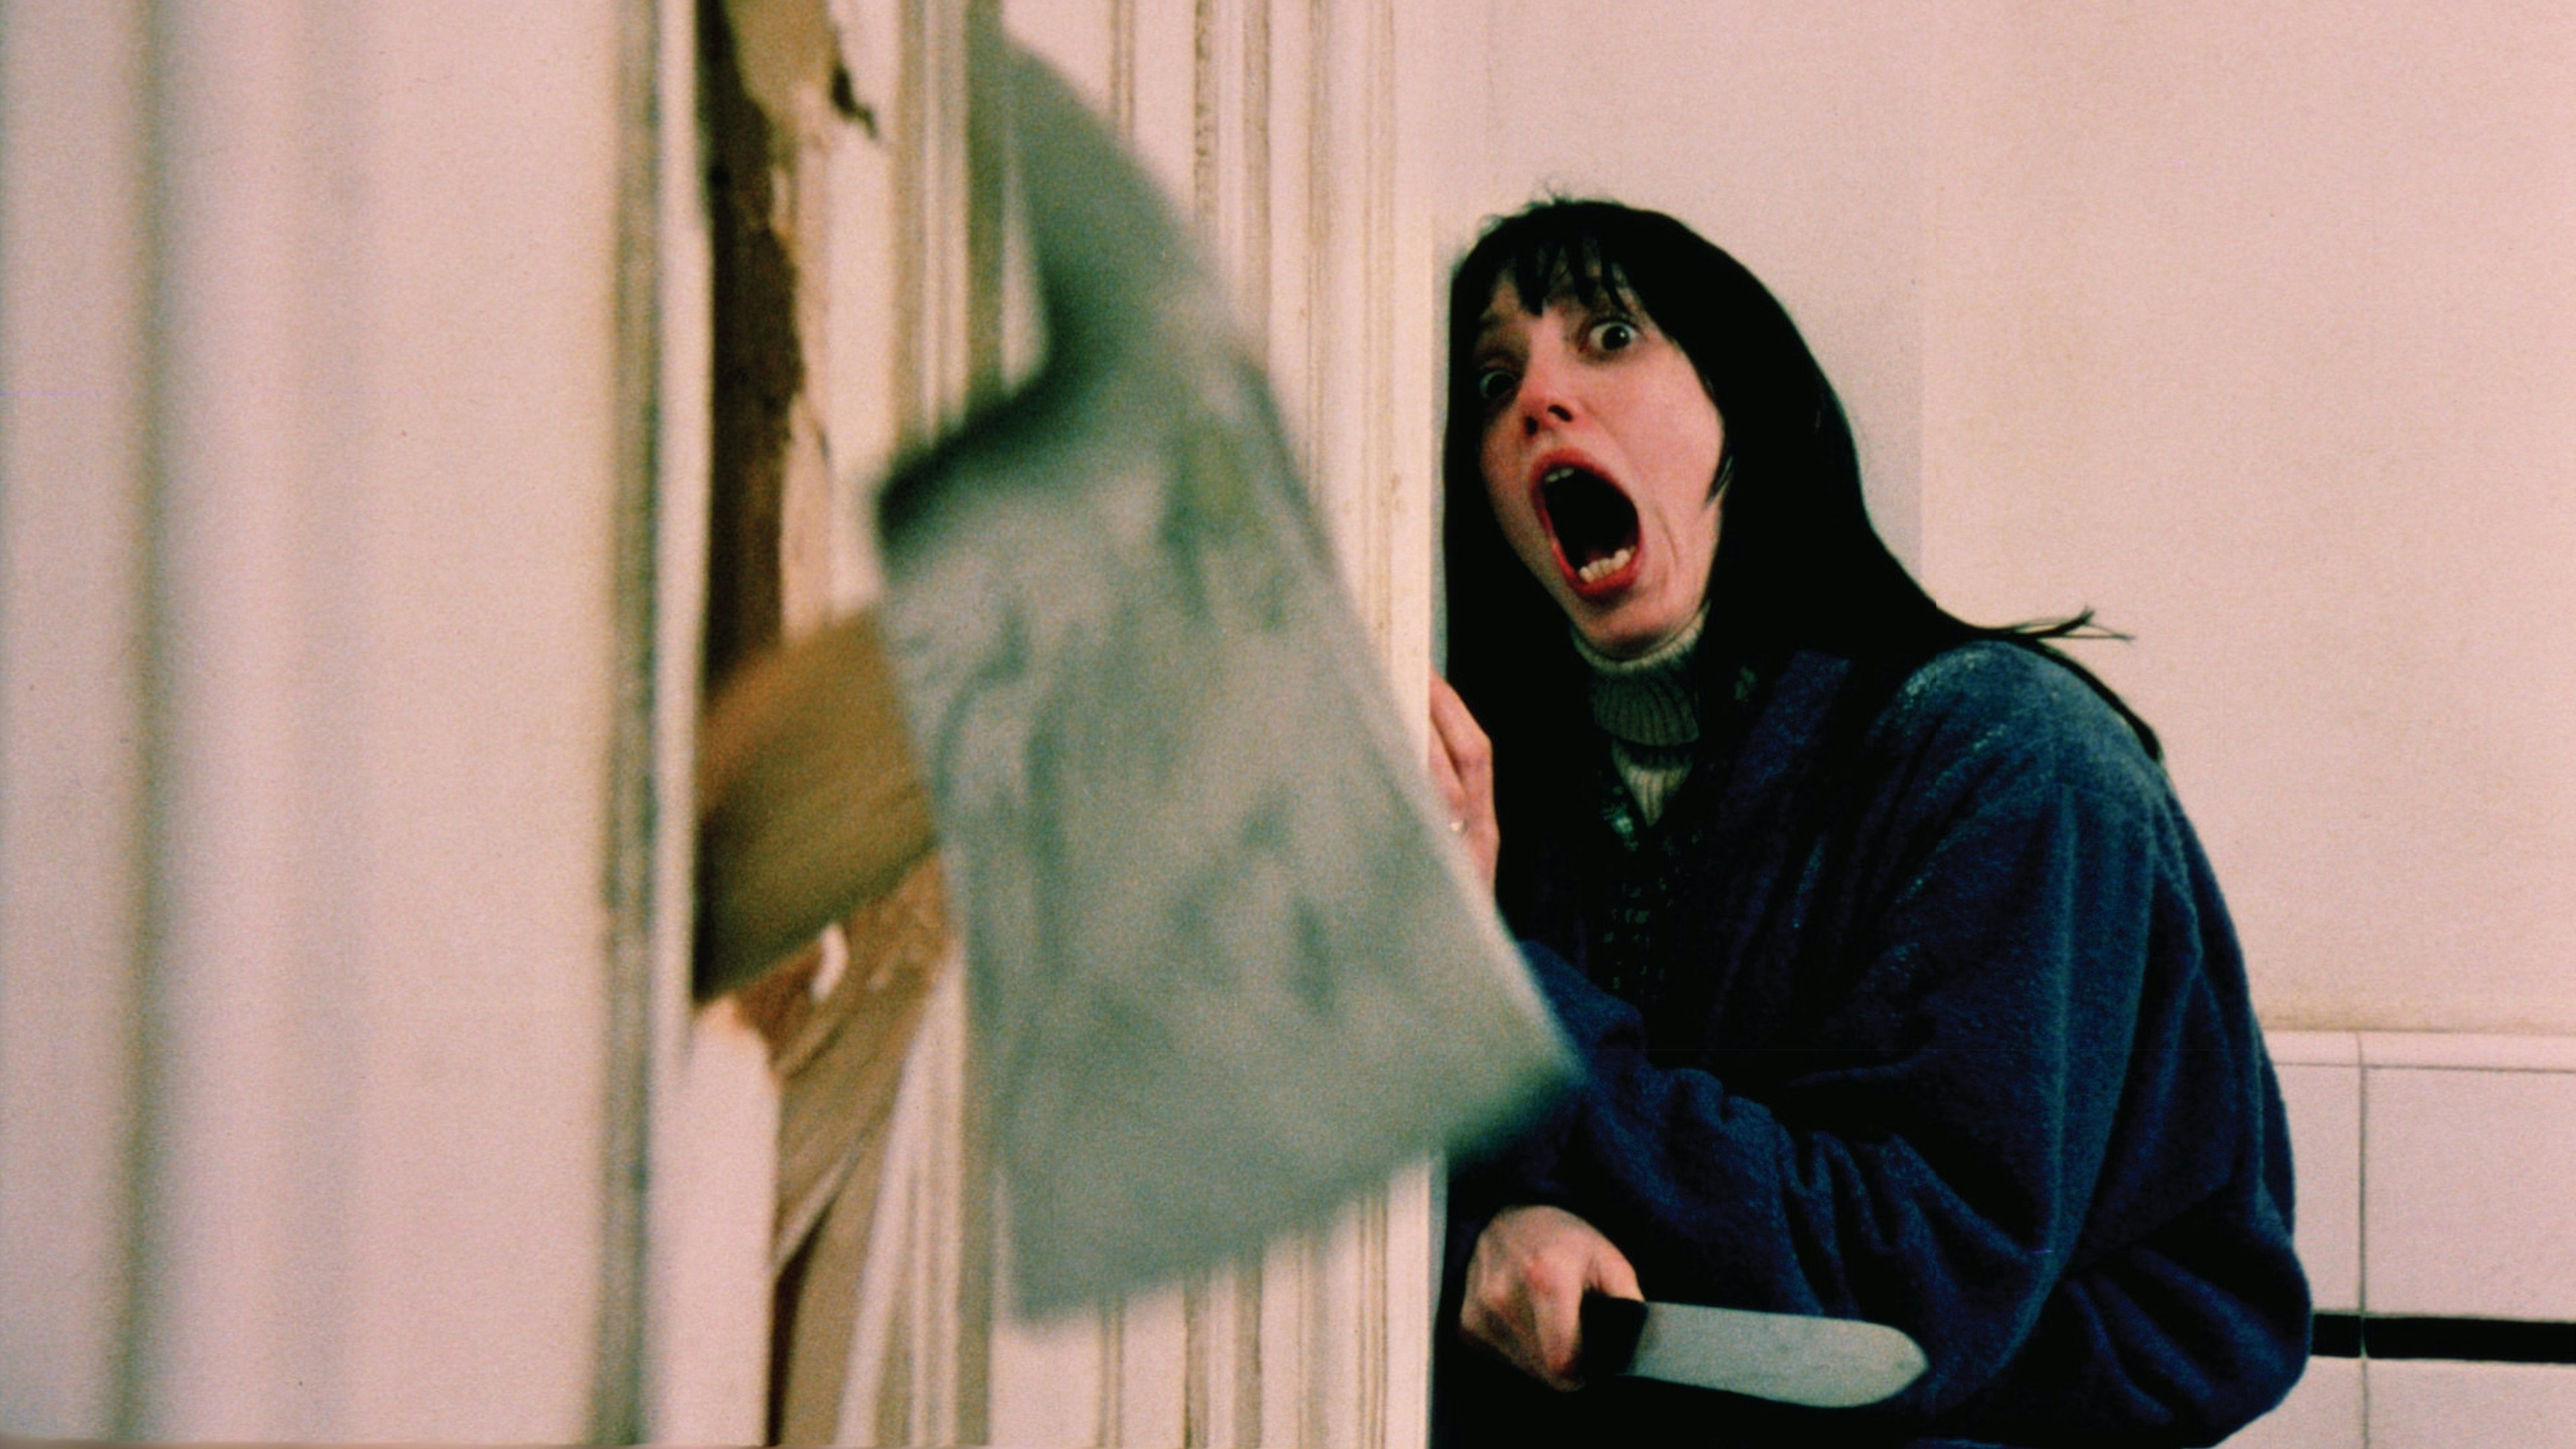 The Shining: 10 Big Differences Between The Book And Movie